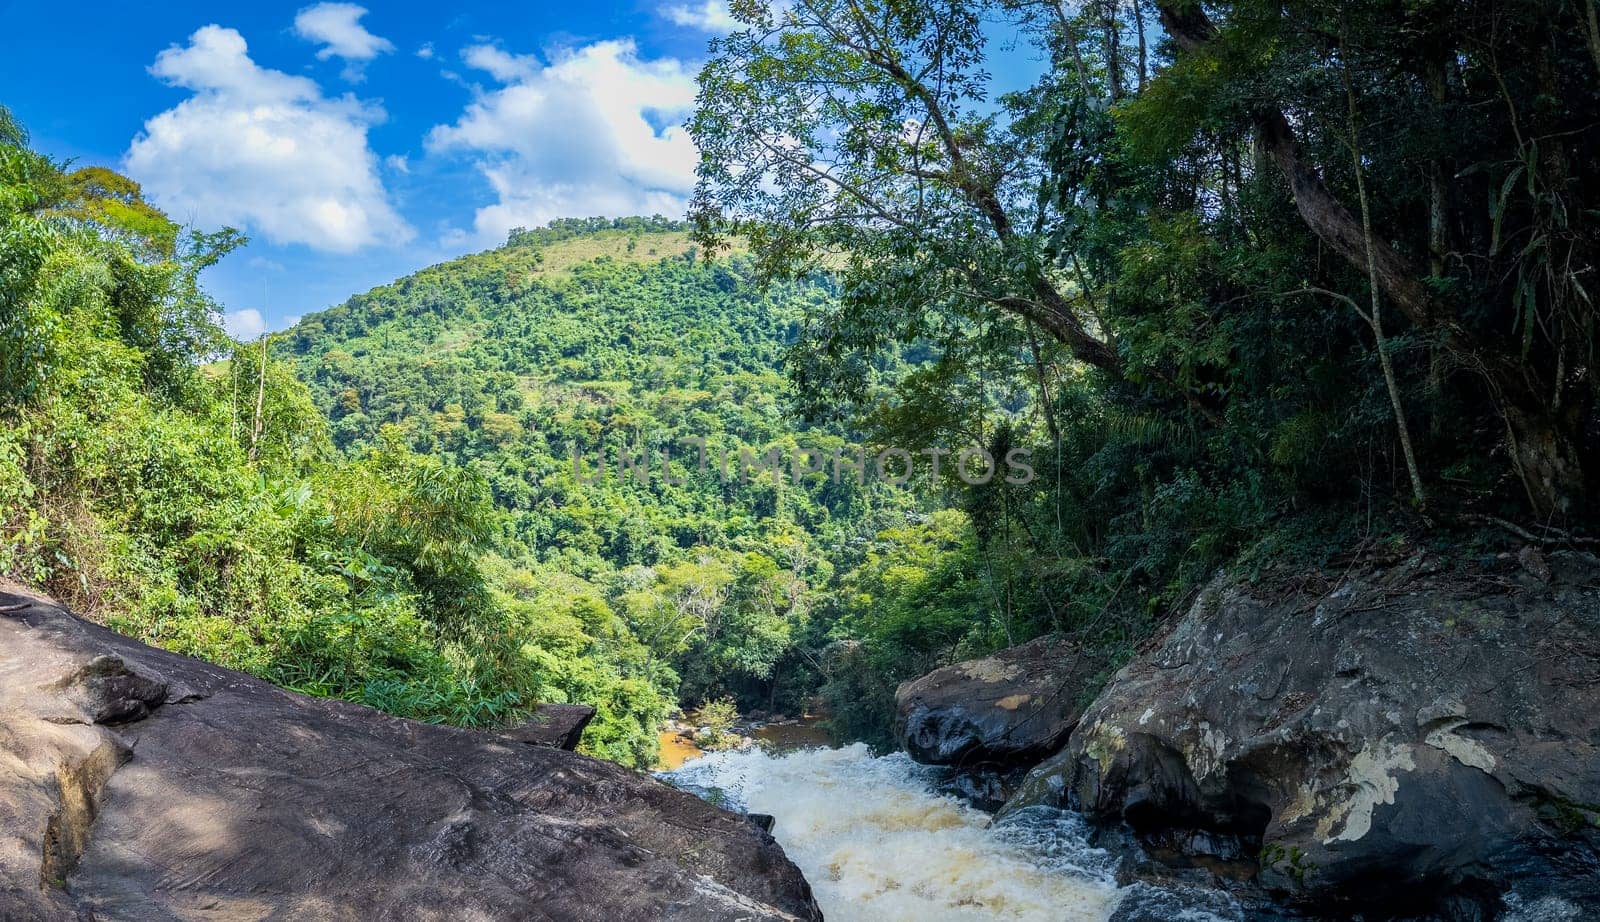 A scenic view of a turbulent river flanked by lush jungle under a clear blue sky.